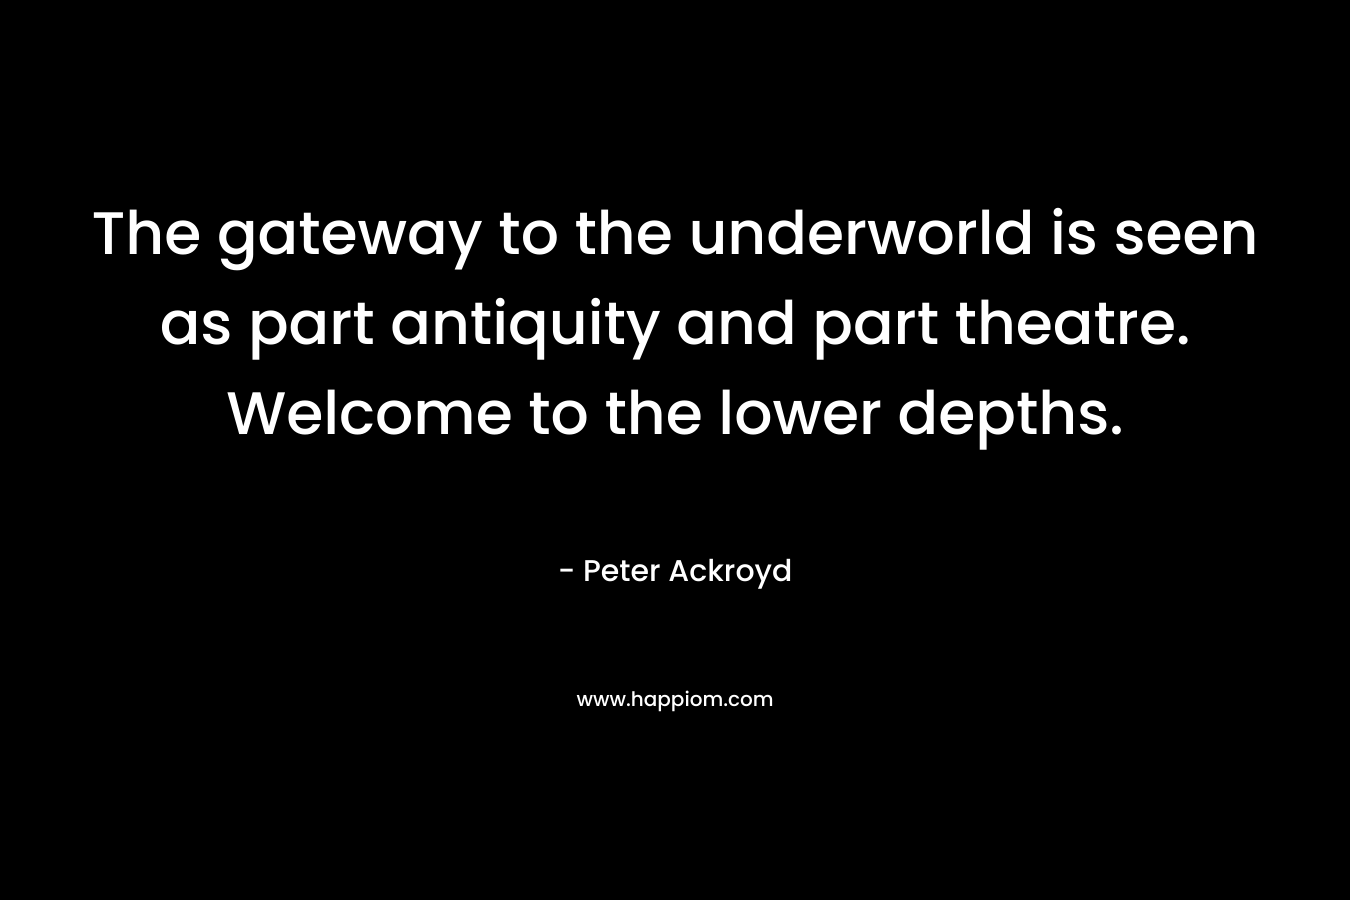 The gateway to the underworld is seen as part antiquity and part theatre. Welcome to the lower depths. – Peter Ackroyd